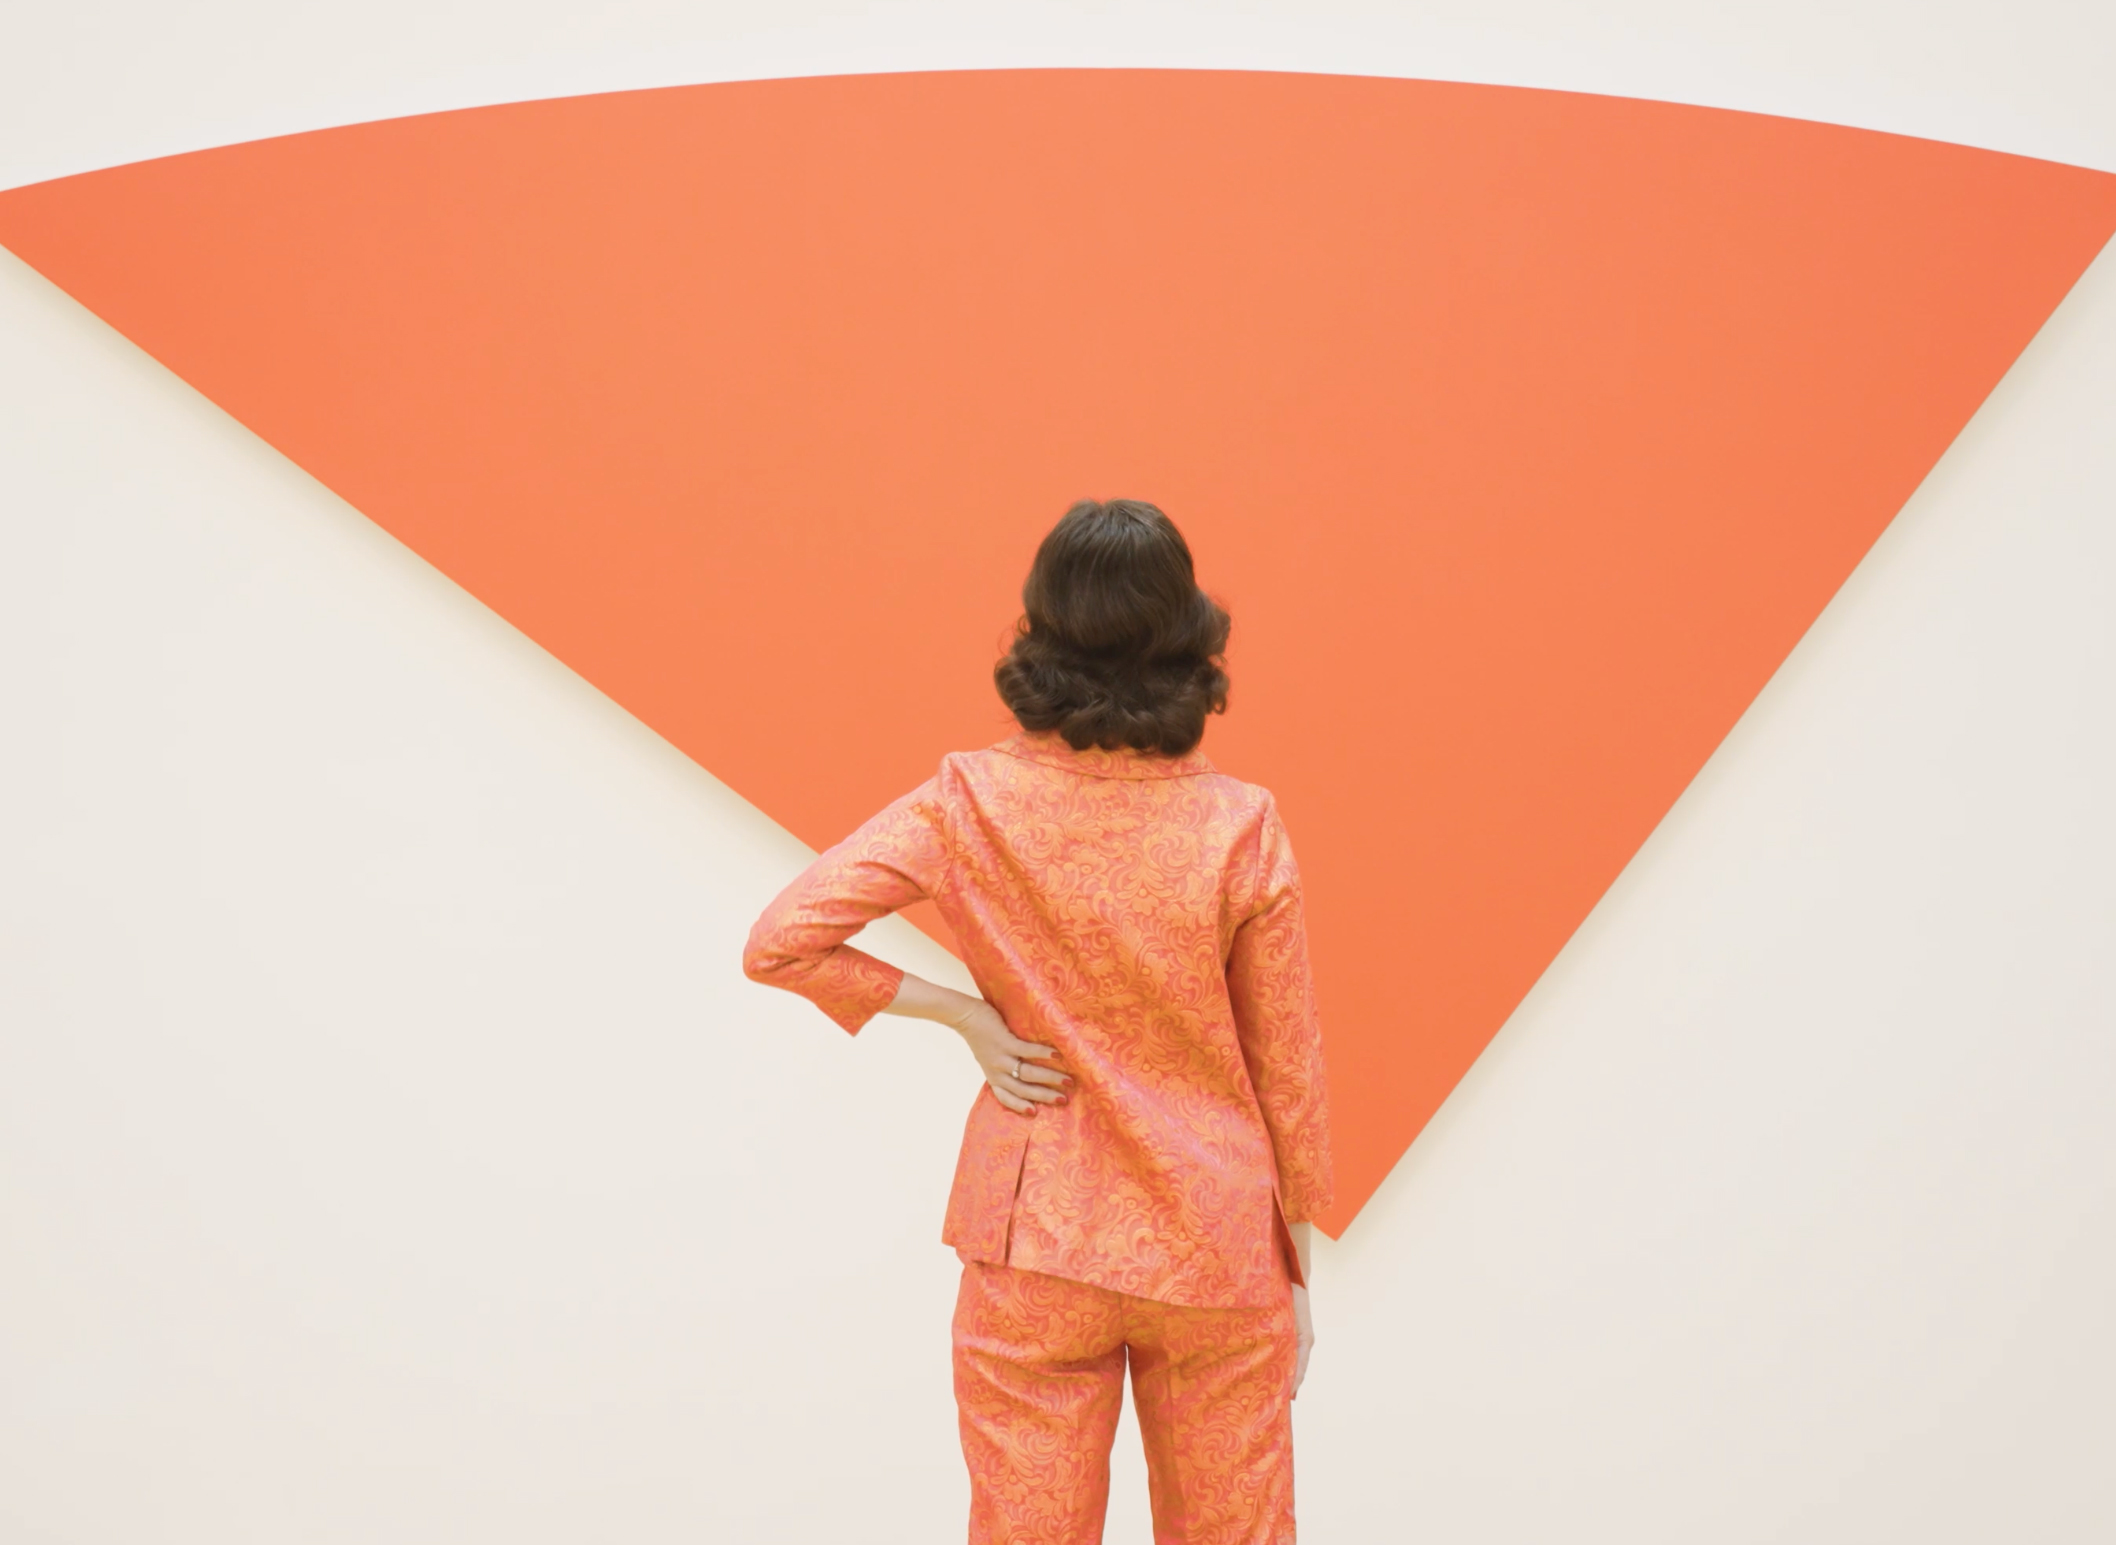 Brunette woman in a red pantsuit stands in front of a triangular wedge by Ellsworth Kelly.